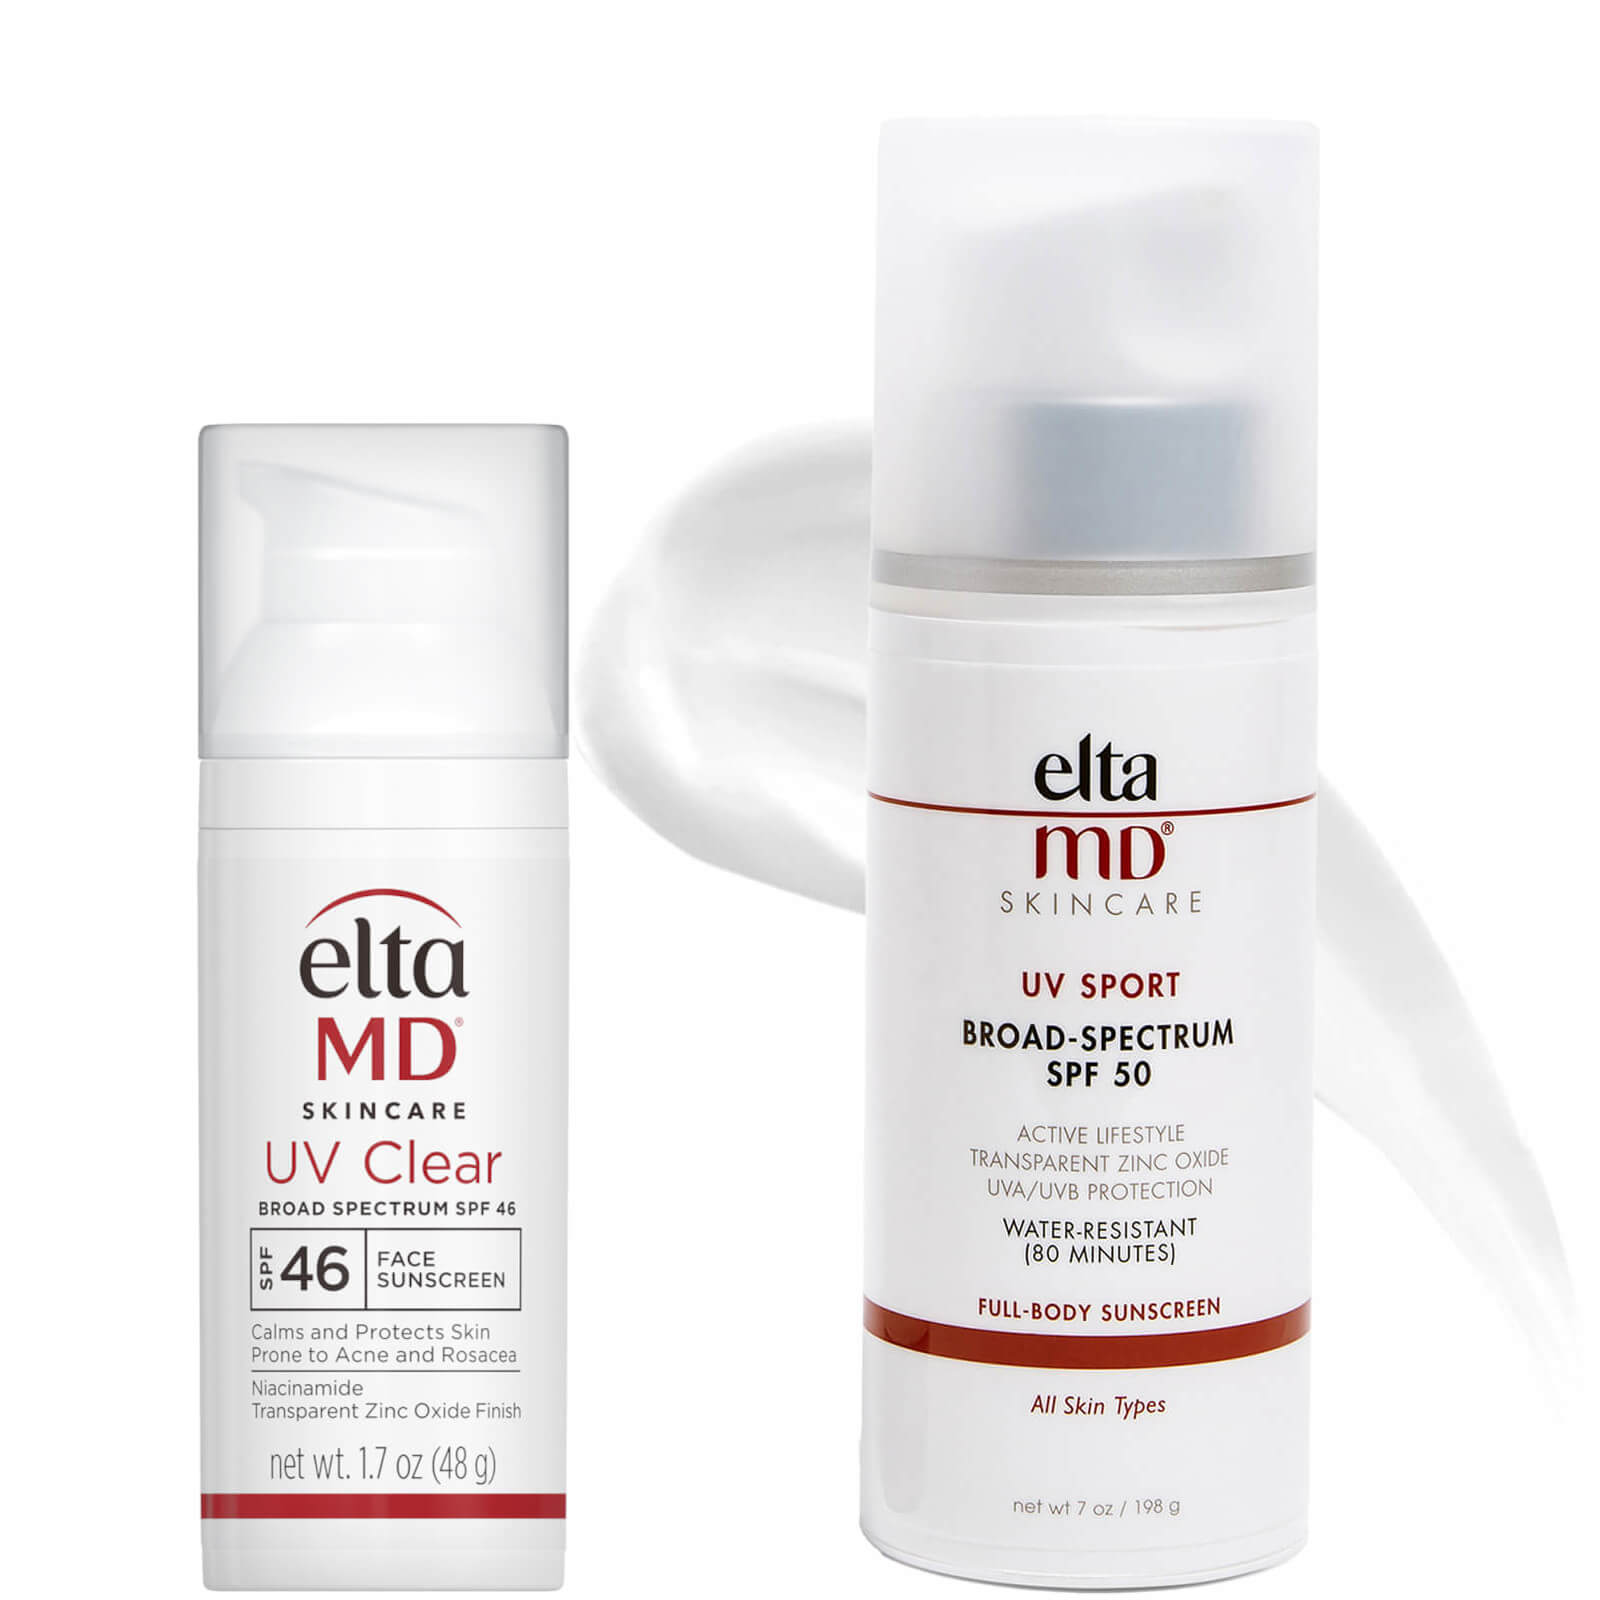 Eltamd Exclusive Uv Sport Spf 50 And Uv Clear Spf 46 Duo